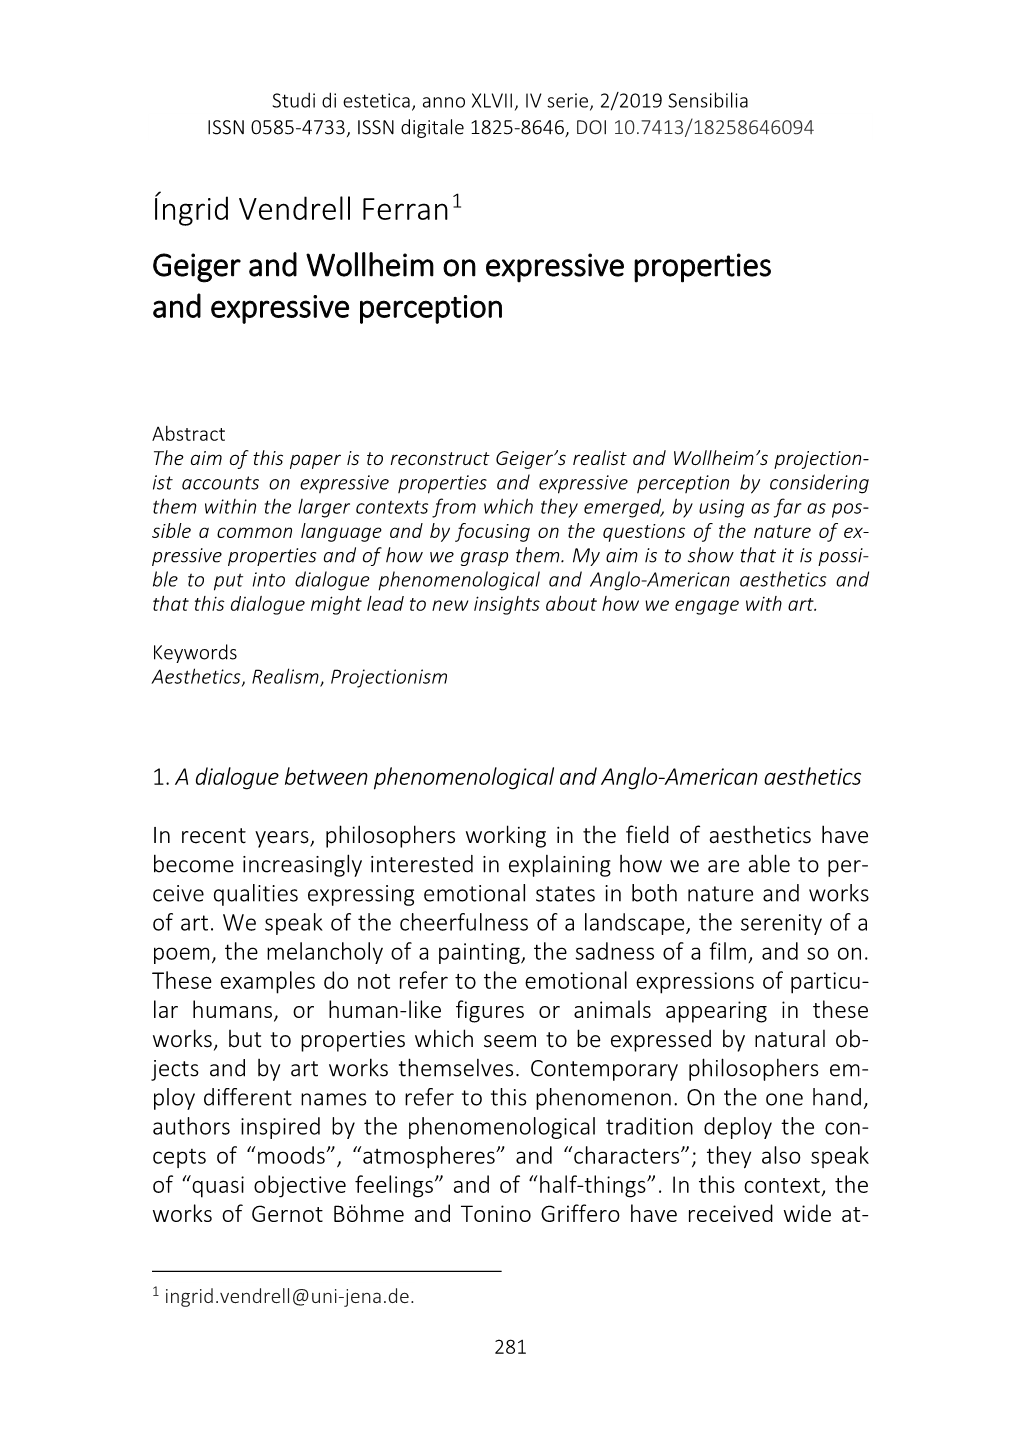 Íngrid Vendrell Ferran1 Geiger and Wollheim on Expressive Properties and Expressive Perception